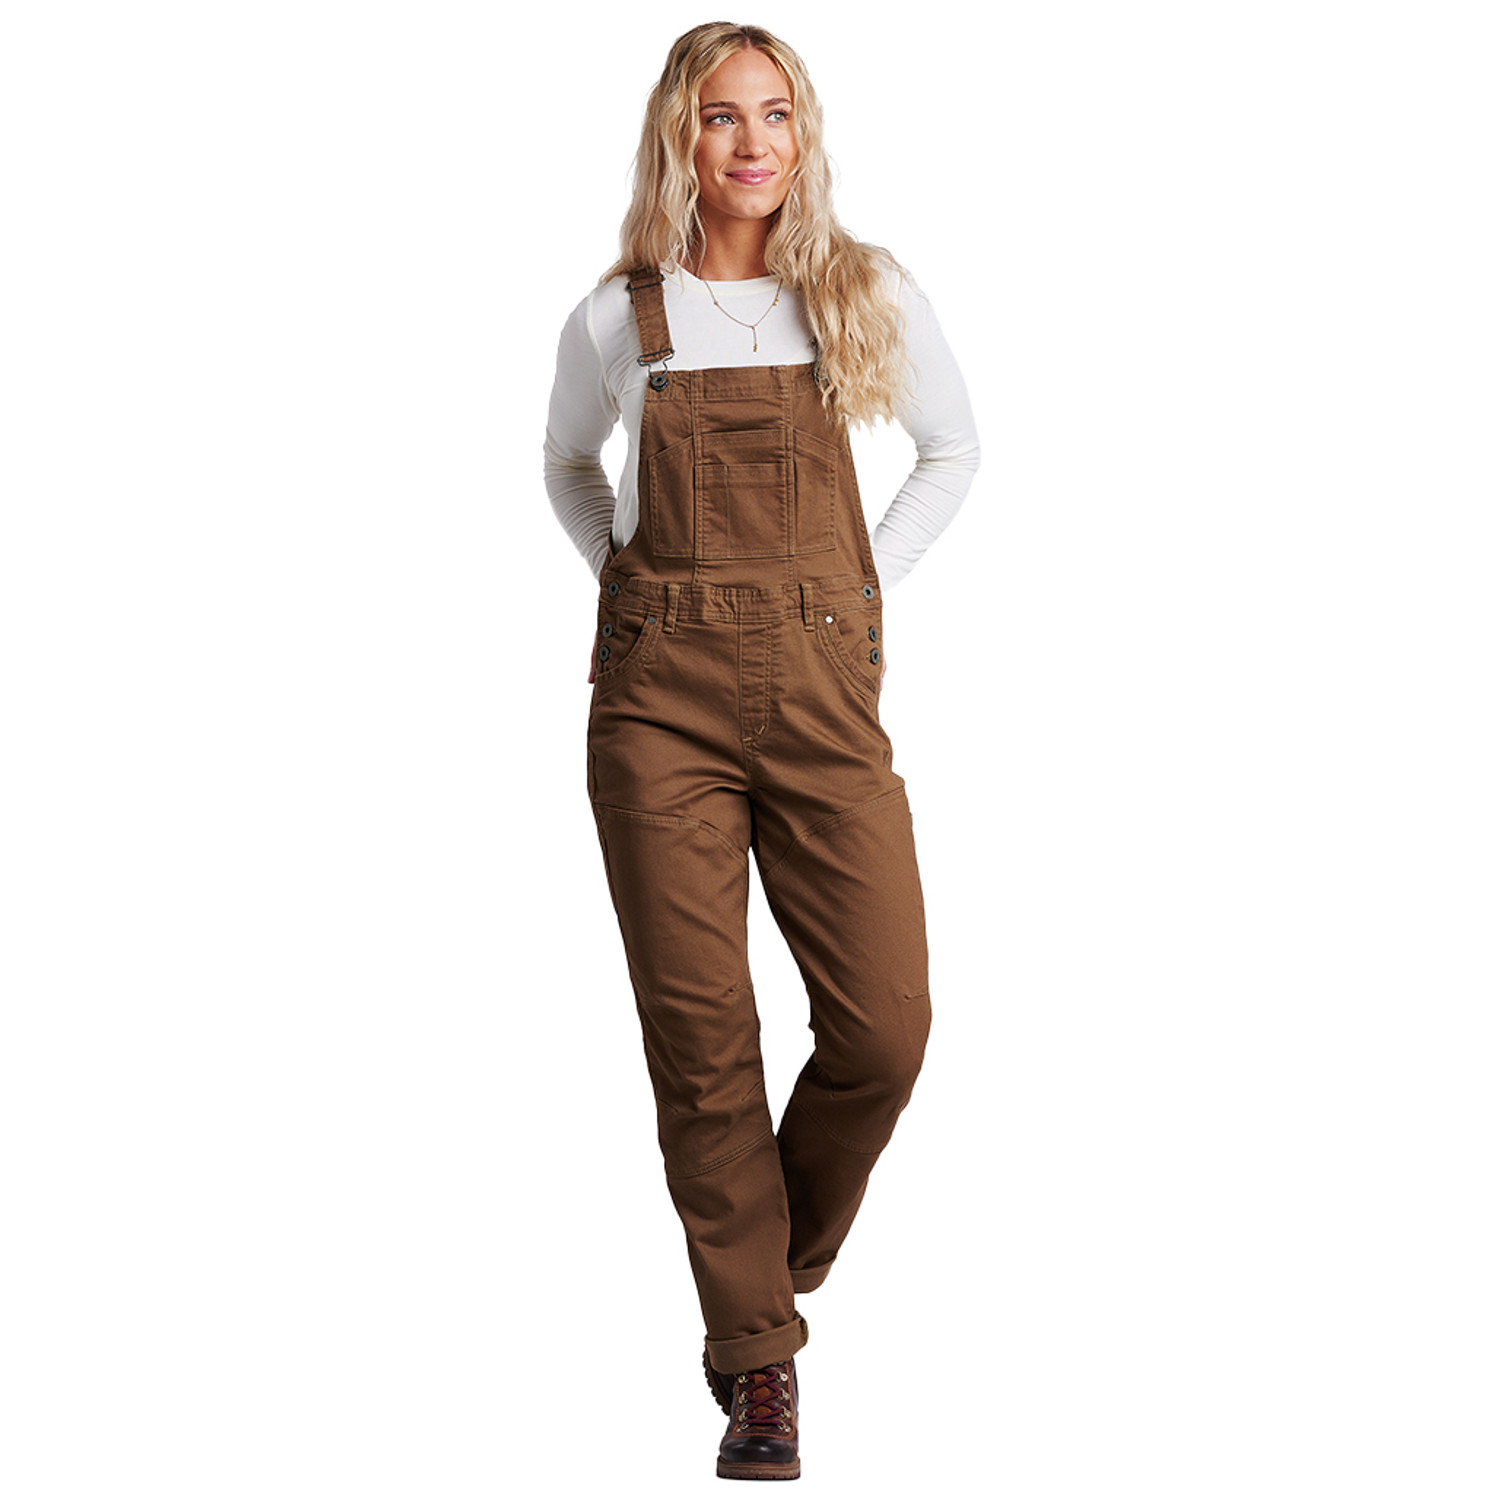 Kontour Kraft Overall - Dark Khaki - 6th Ave Outfitters Co-op